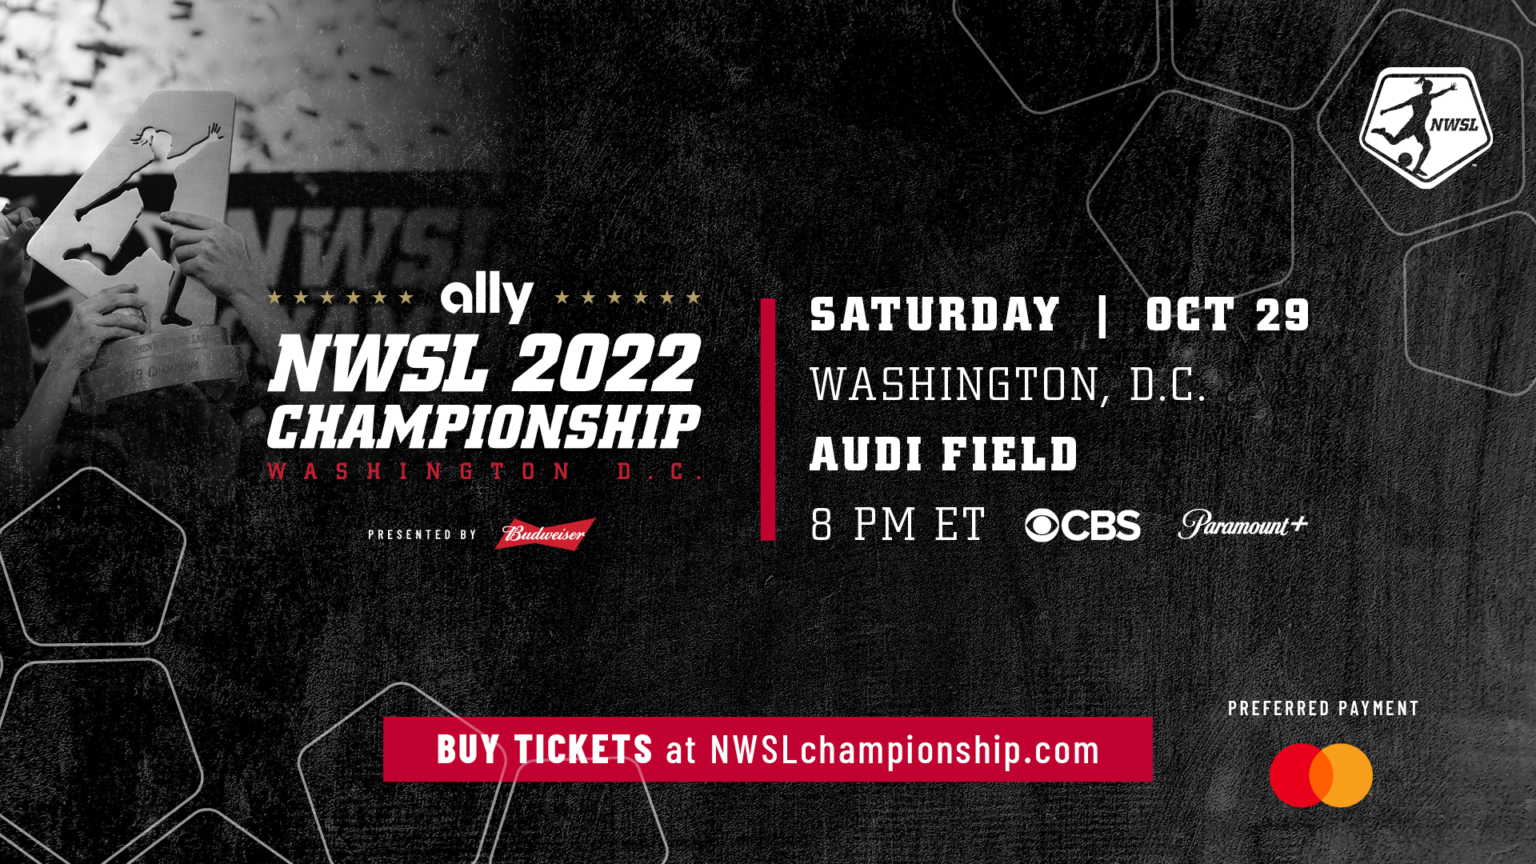 2022 NWSL Championship to be Hosted at Audi Field Audi Field